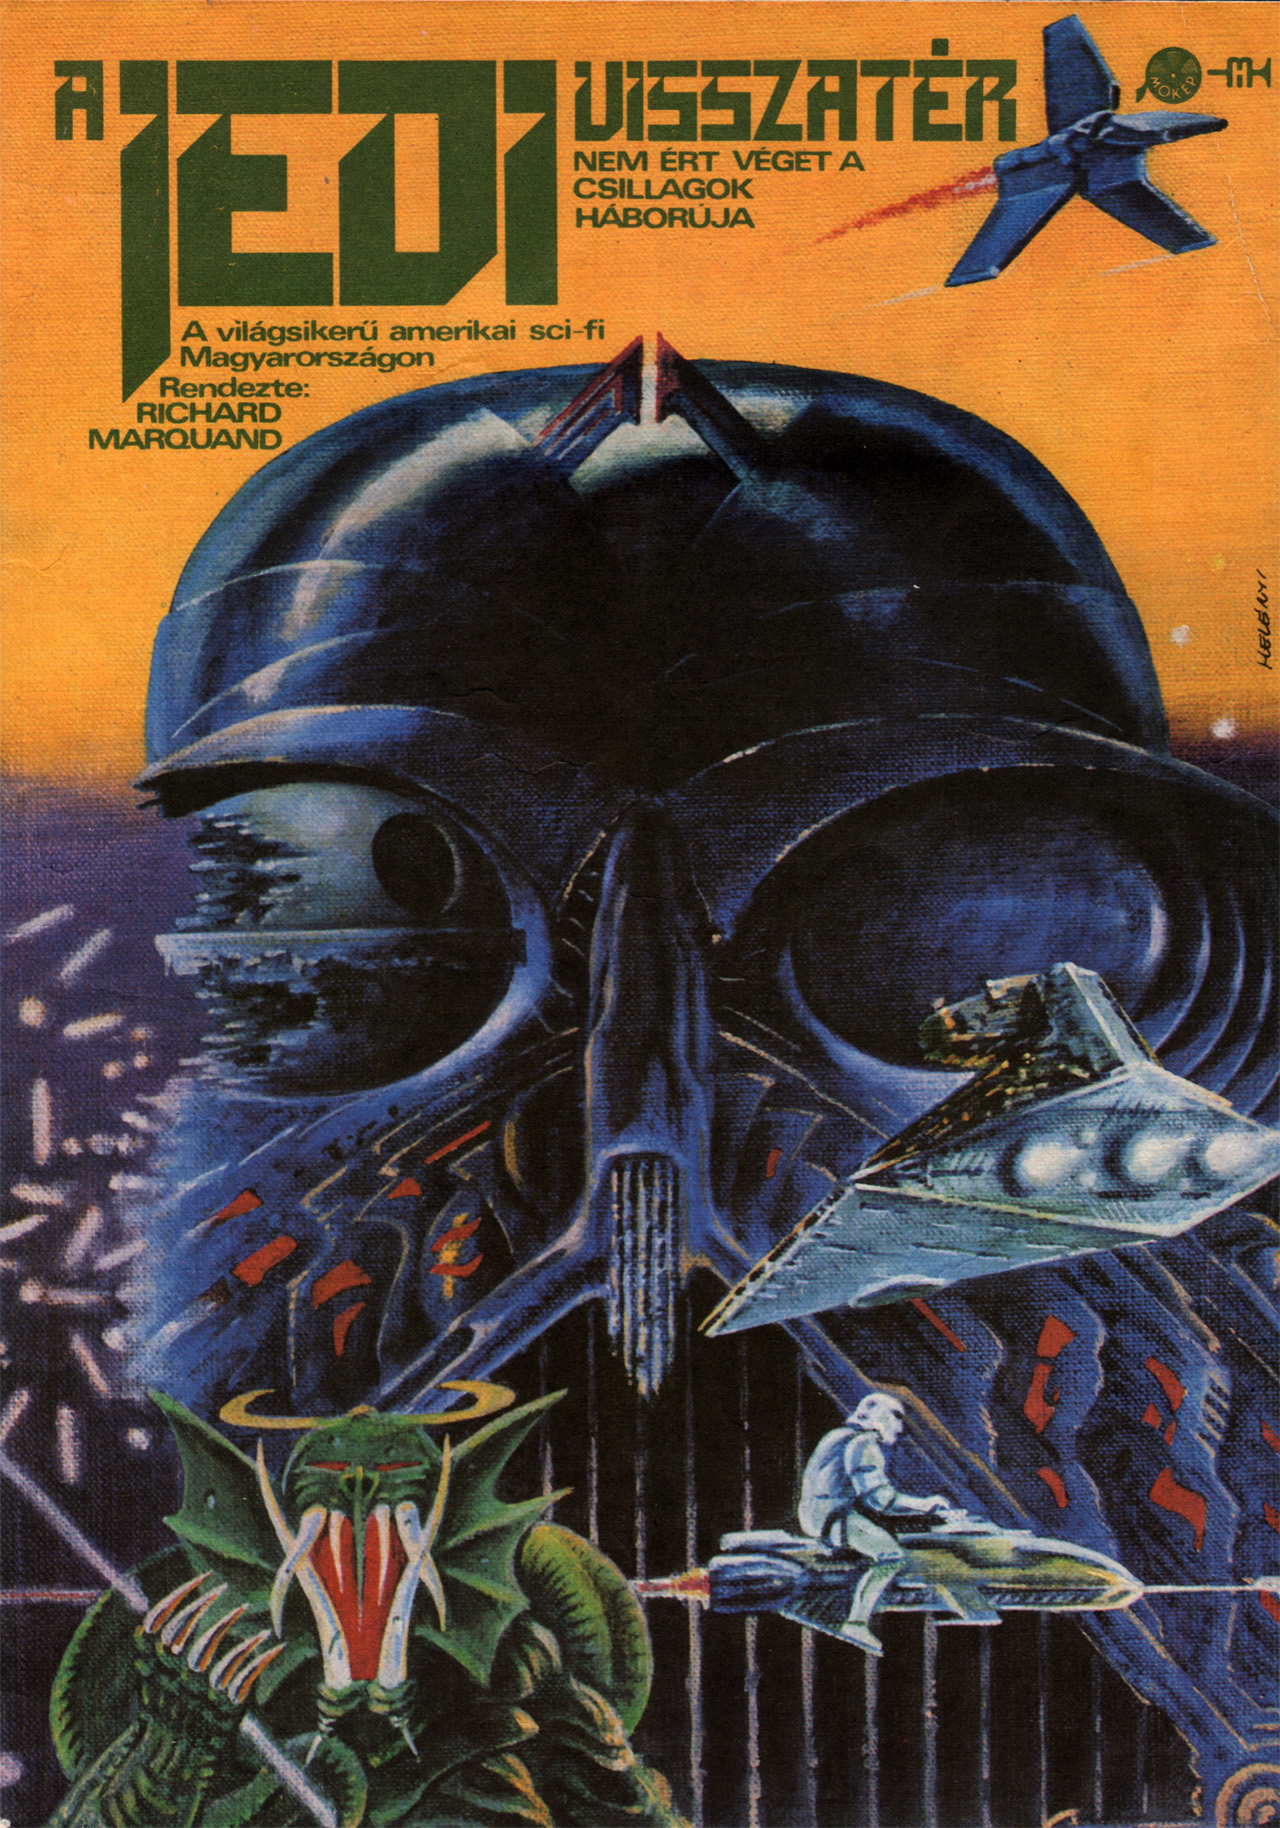 Here’s Your Chance To Own This Legendarily Weird Star Wars Poster Art